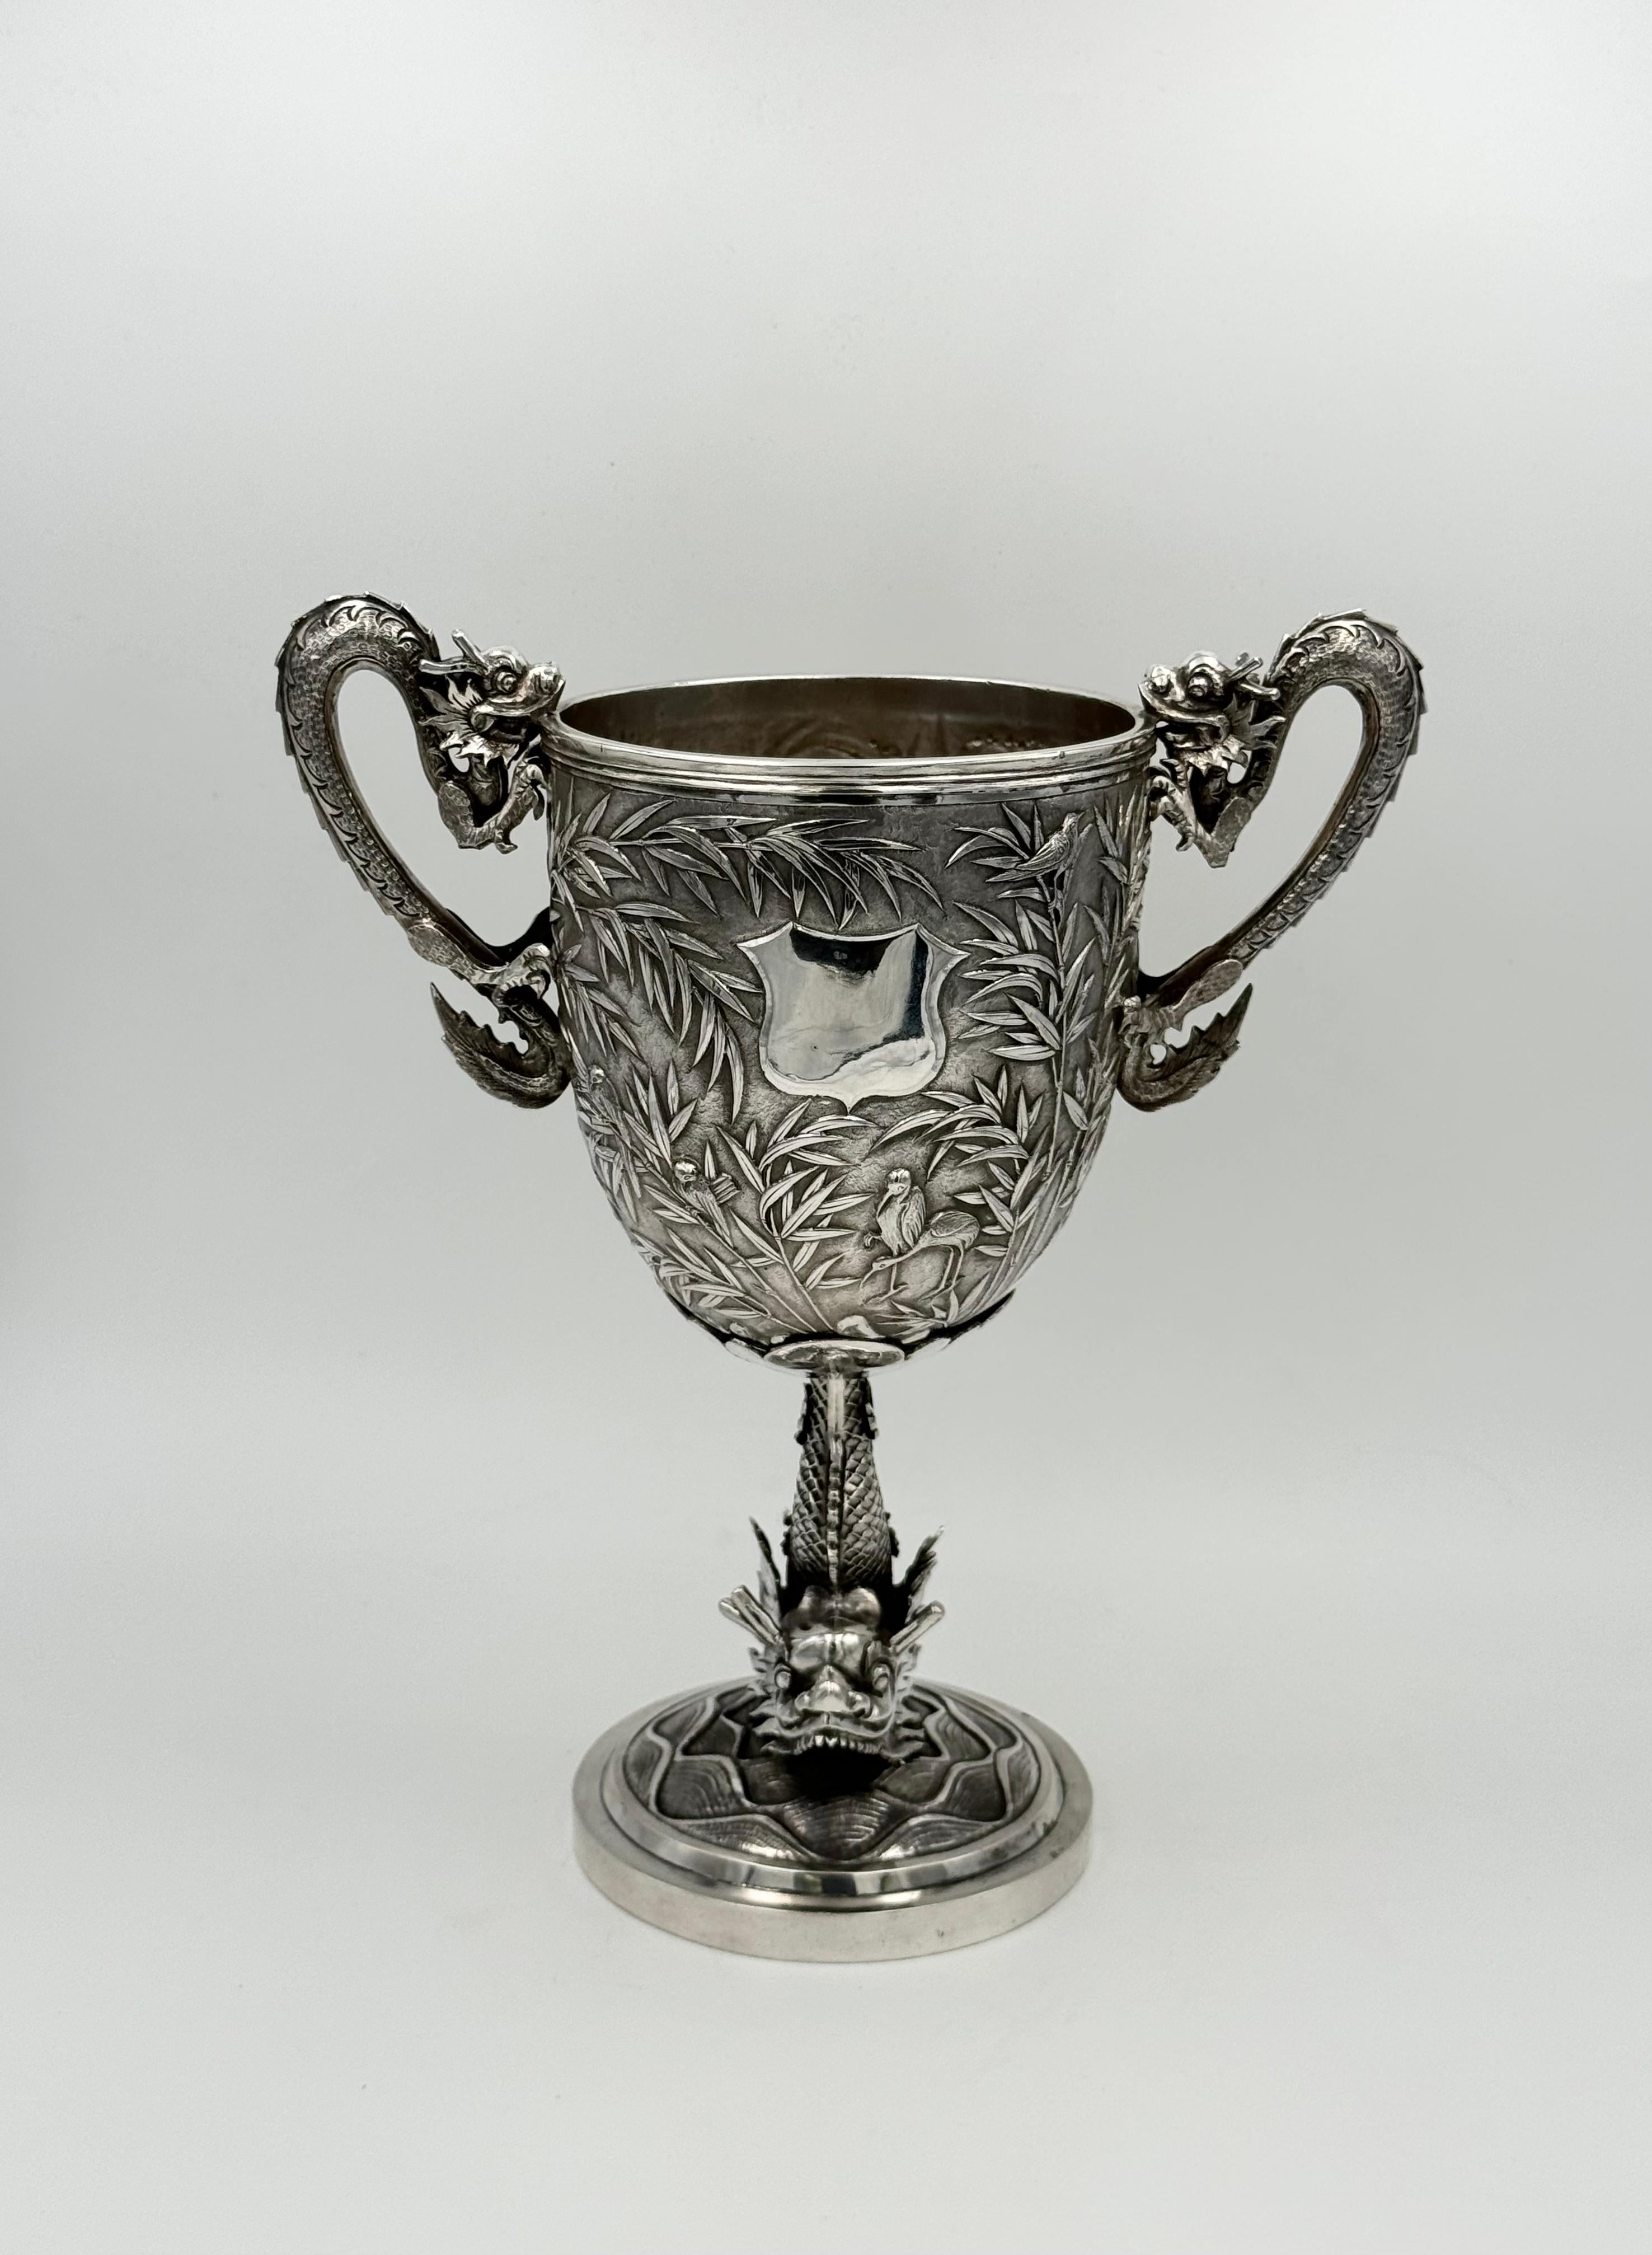 A Chinese Export Silver Cup with dragon handles, and with birds and bamboo chased and embossed around the body. The cup is supported by a further dragon atop a base of waves. With a mark for Wang Hing and dating from around 1890.